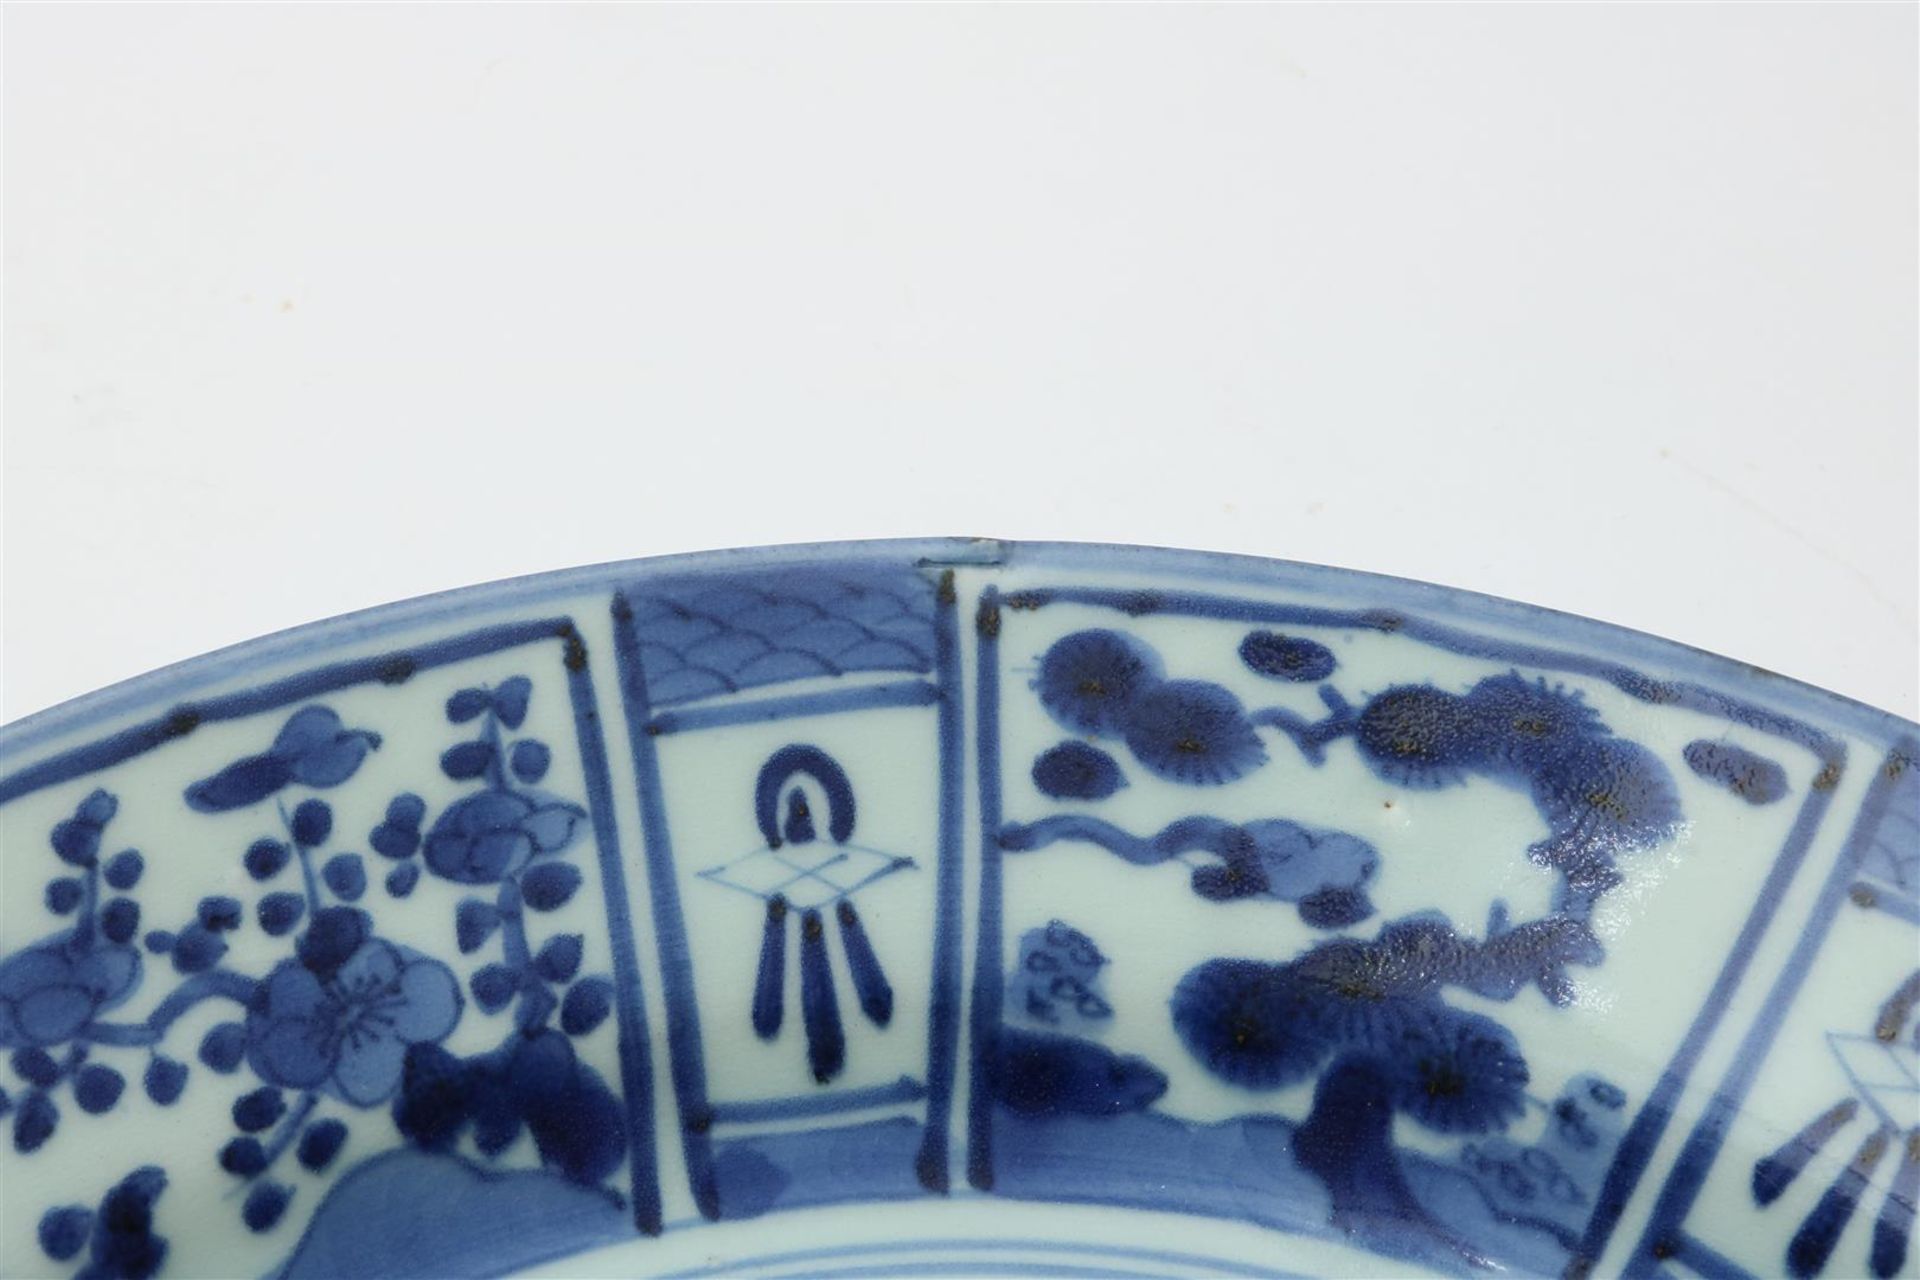 Porcelain Arita dish with central decoration of flowers in vase and cartouche edge decoration, - Image 5 of 5